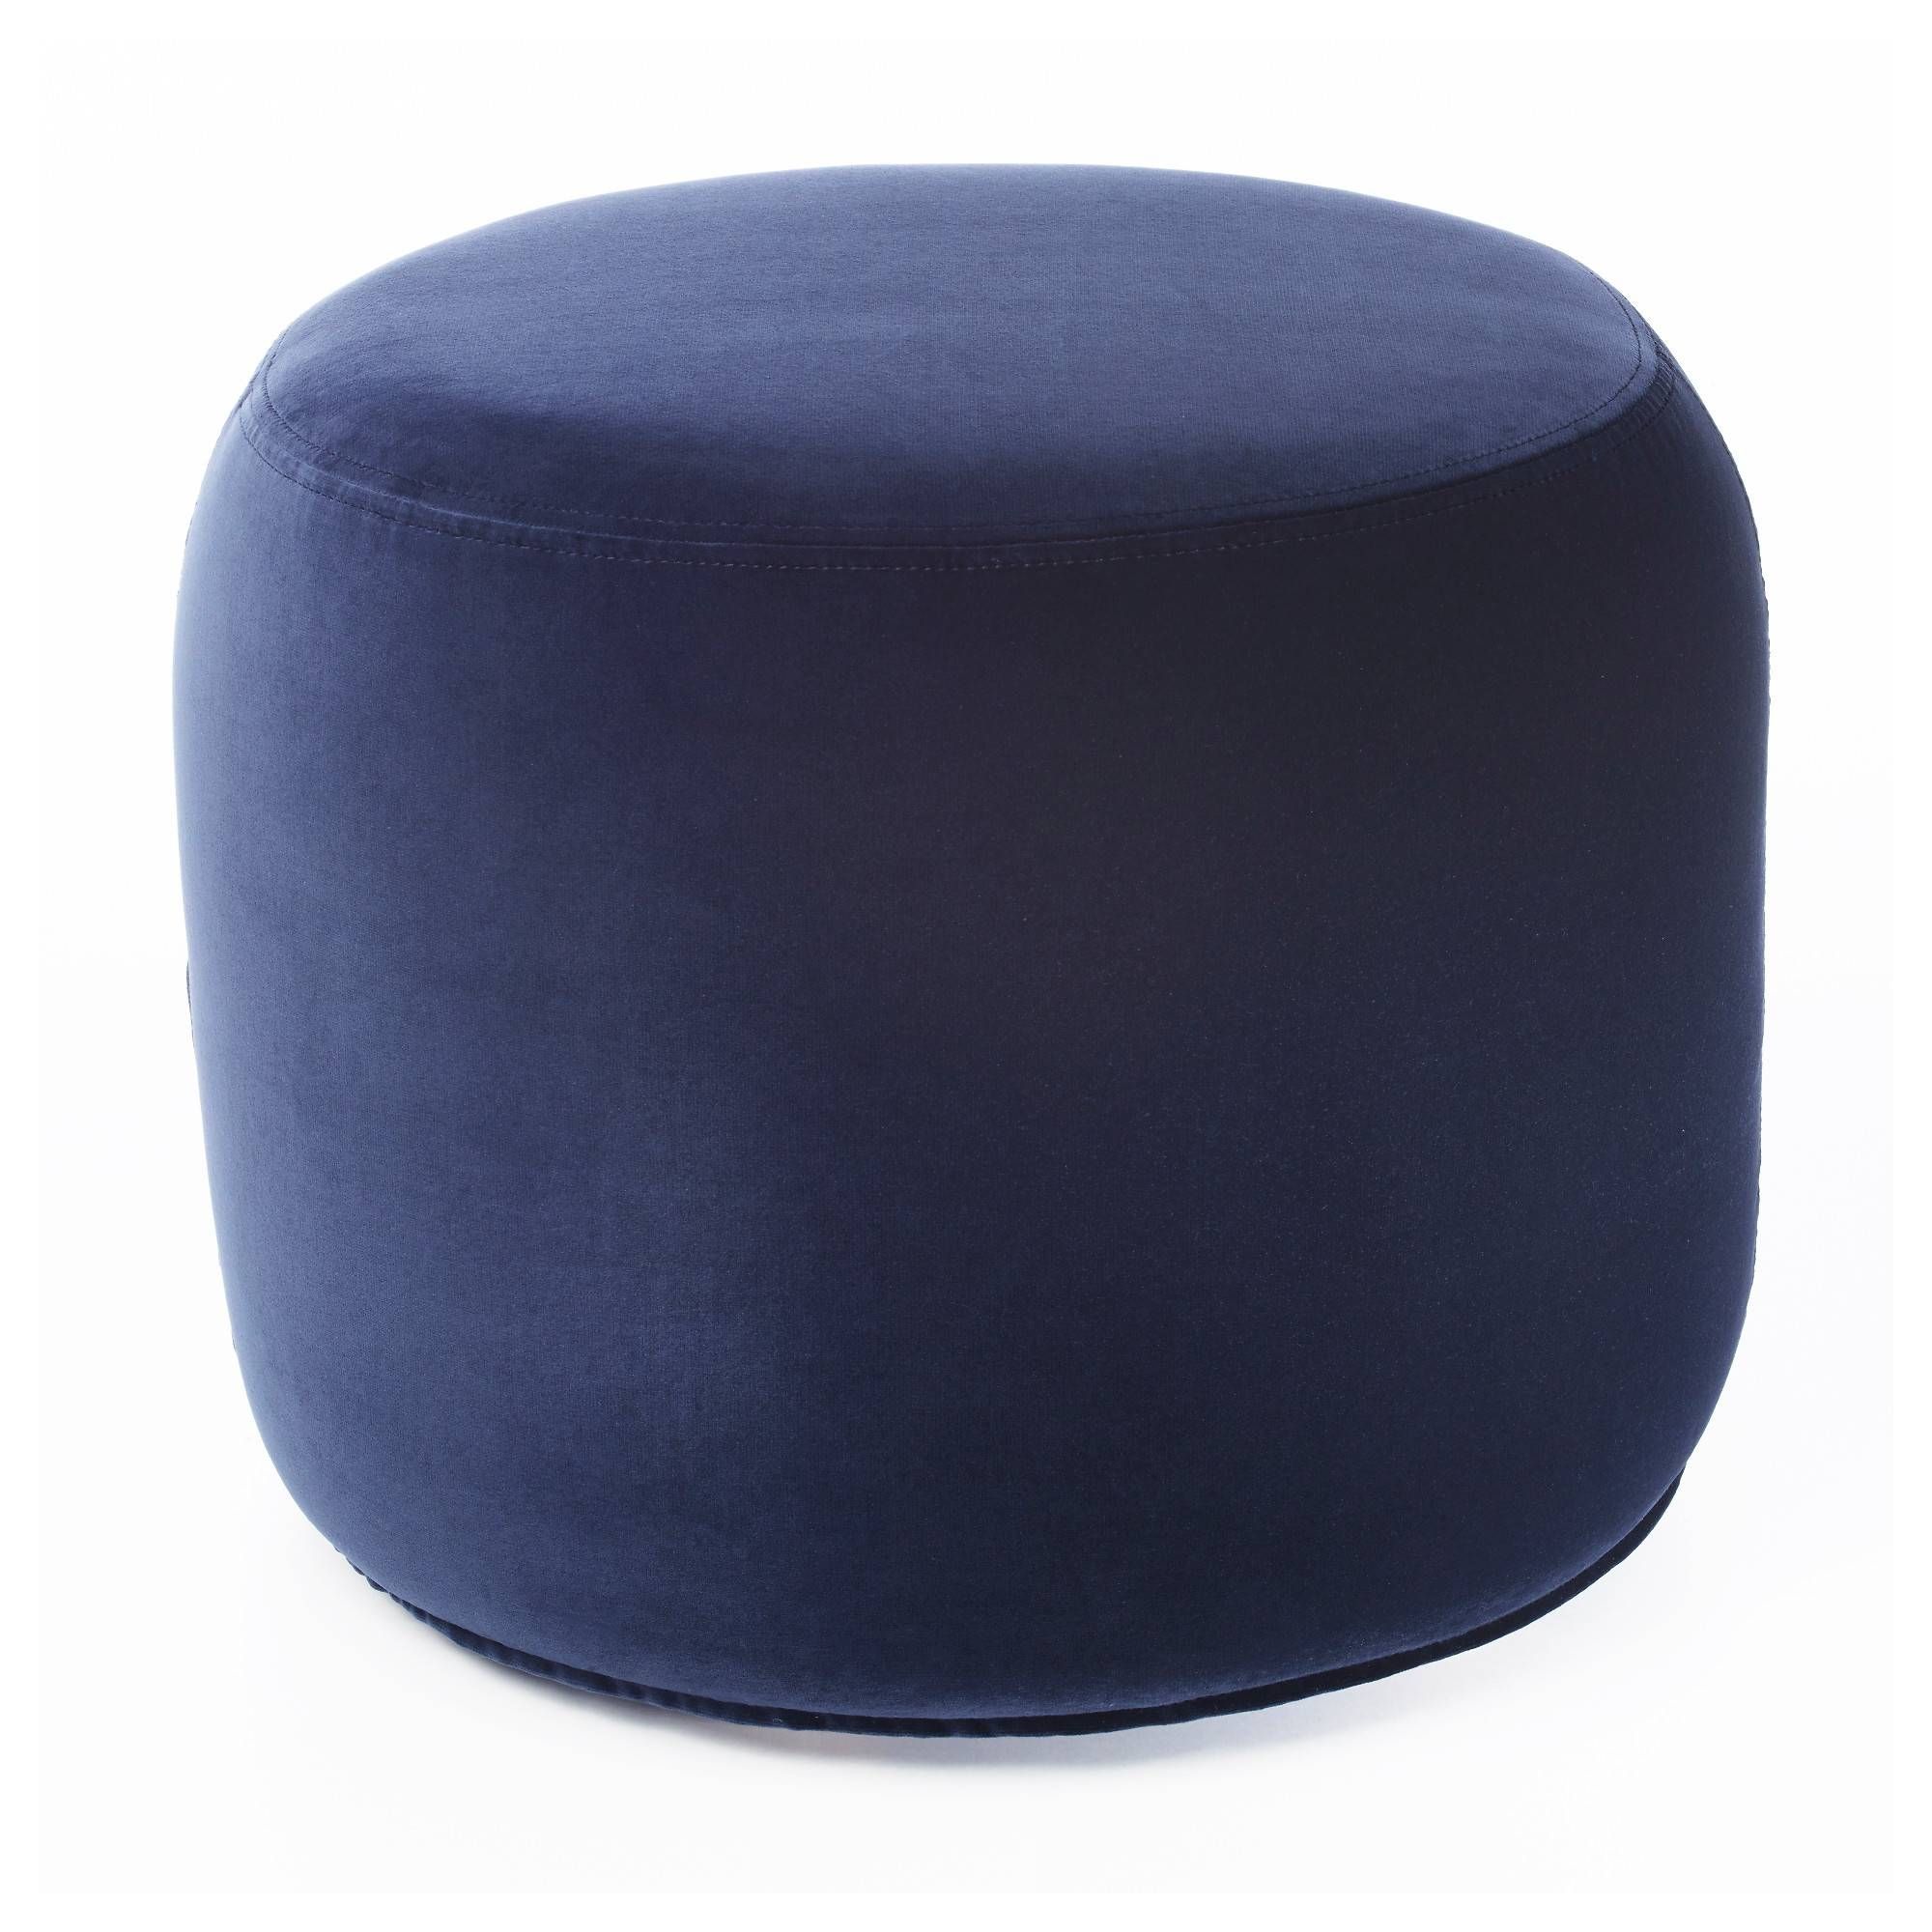 Fabric Footstools | Fabric Pouffe | Ikea Pertaining To Fabric Footstools (View 24 of 30)